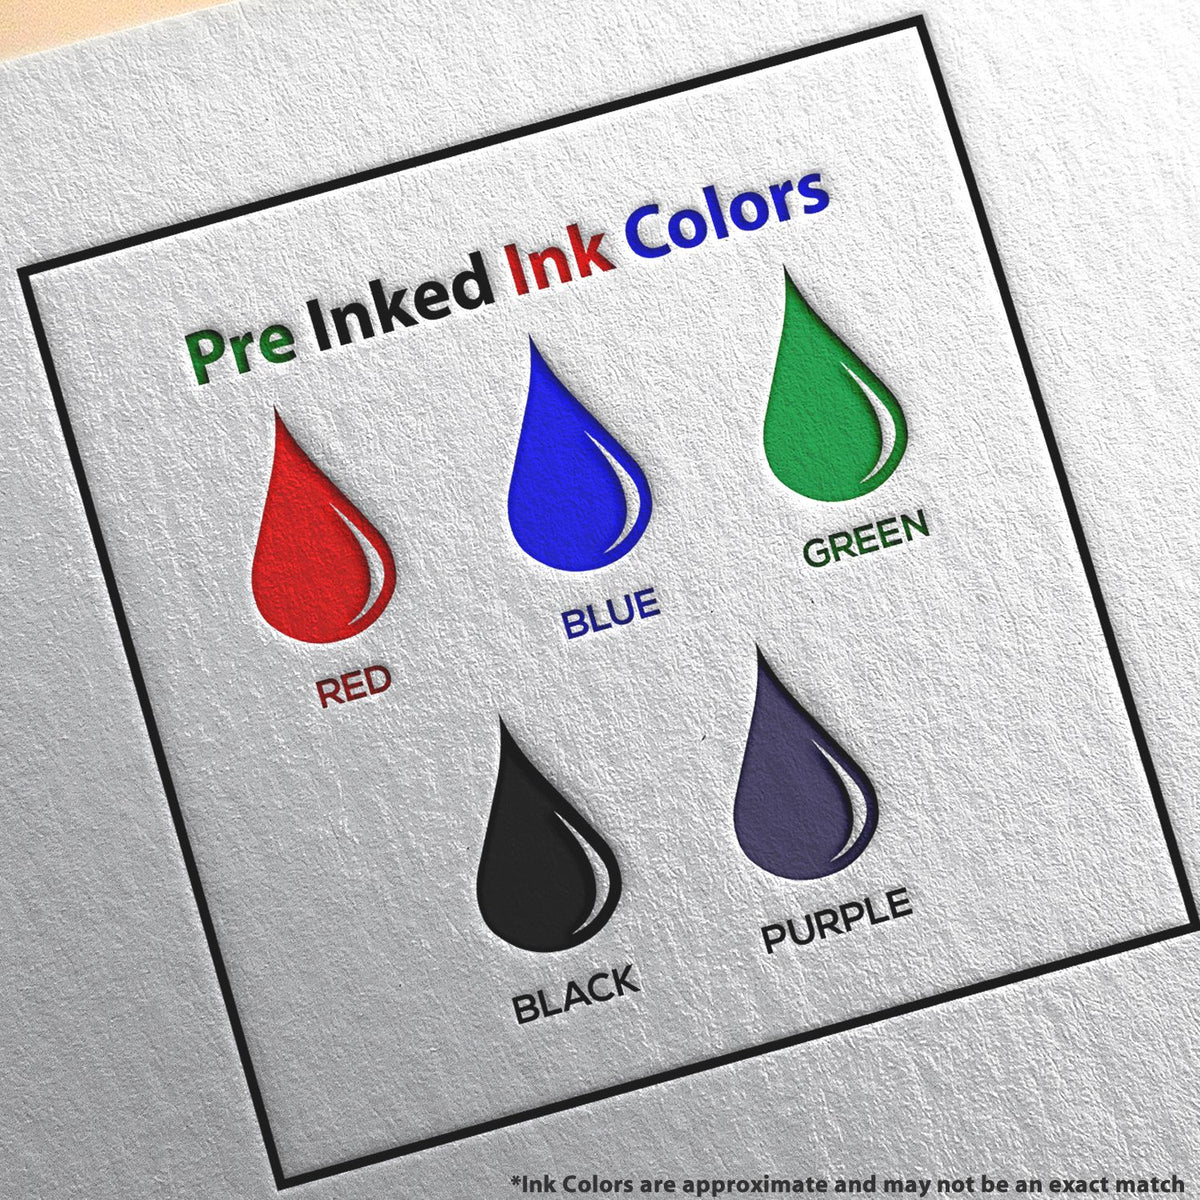 A picture showing the different ink colors or hues available for the Slim Pre-Inked Connecticut Land Surveyor Seal Stamp product.